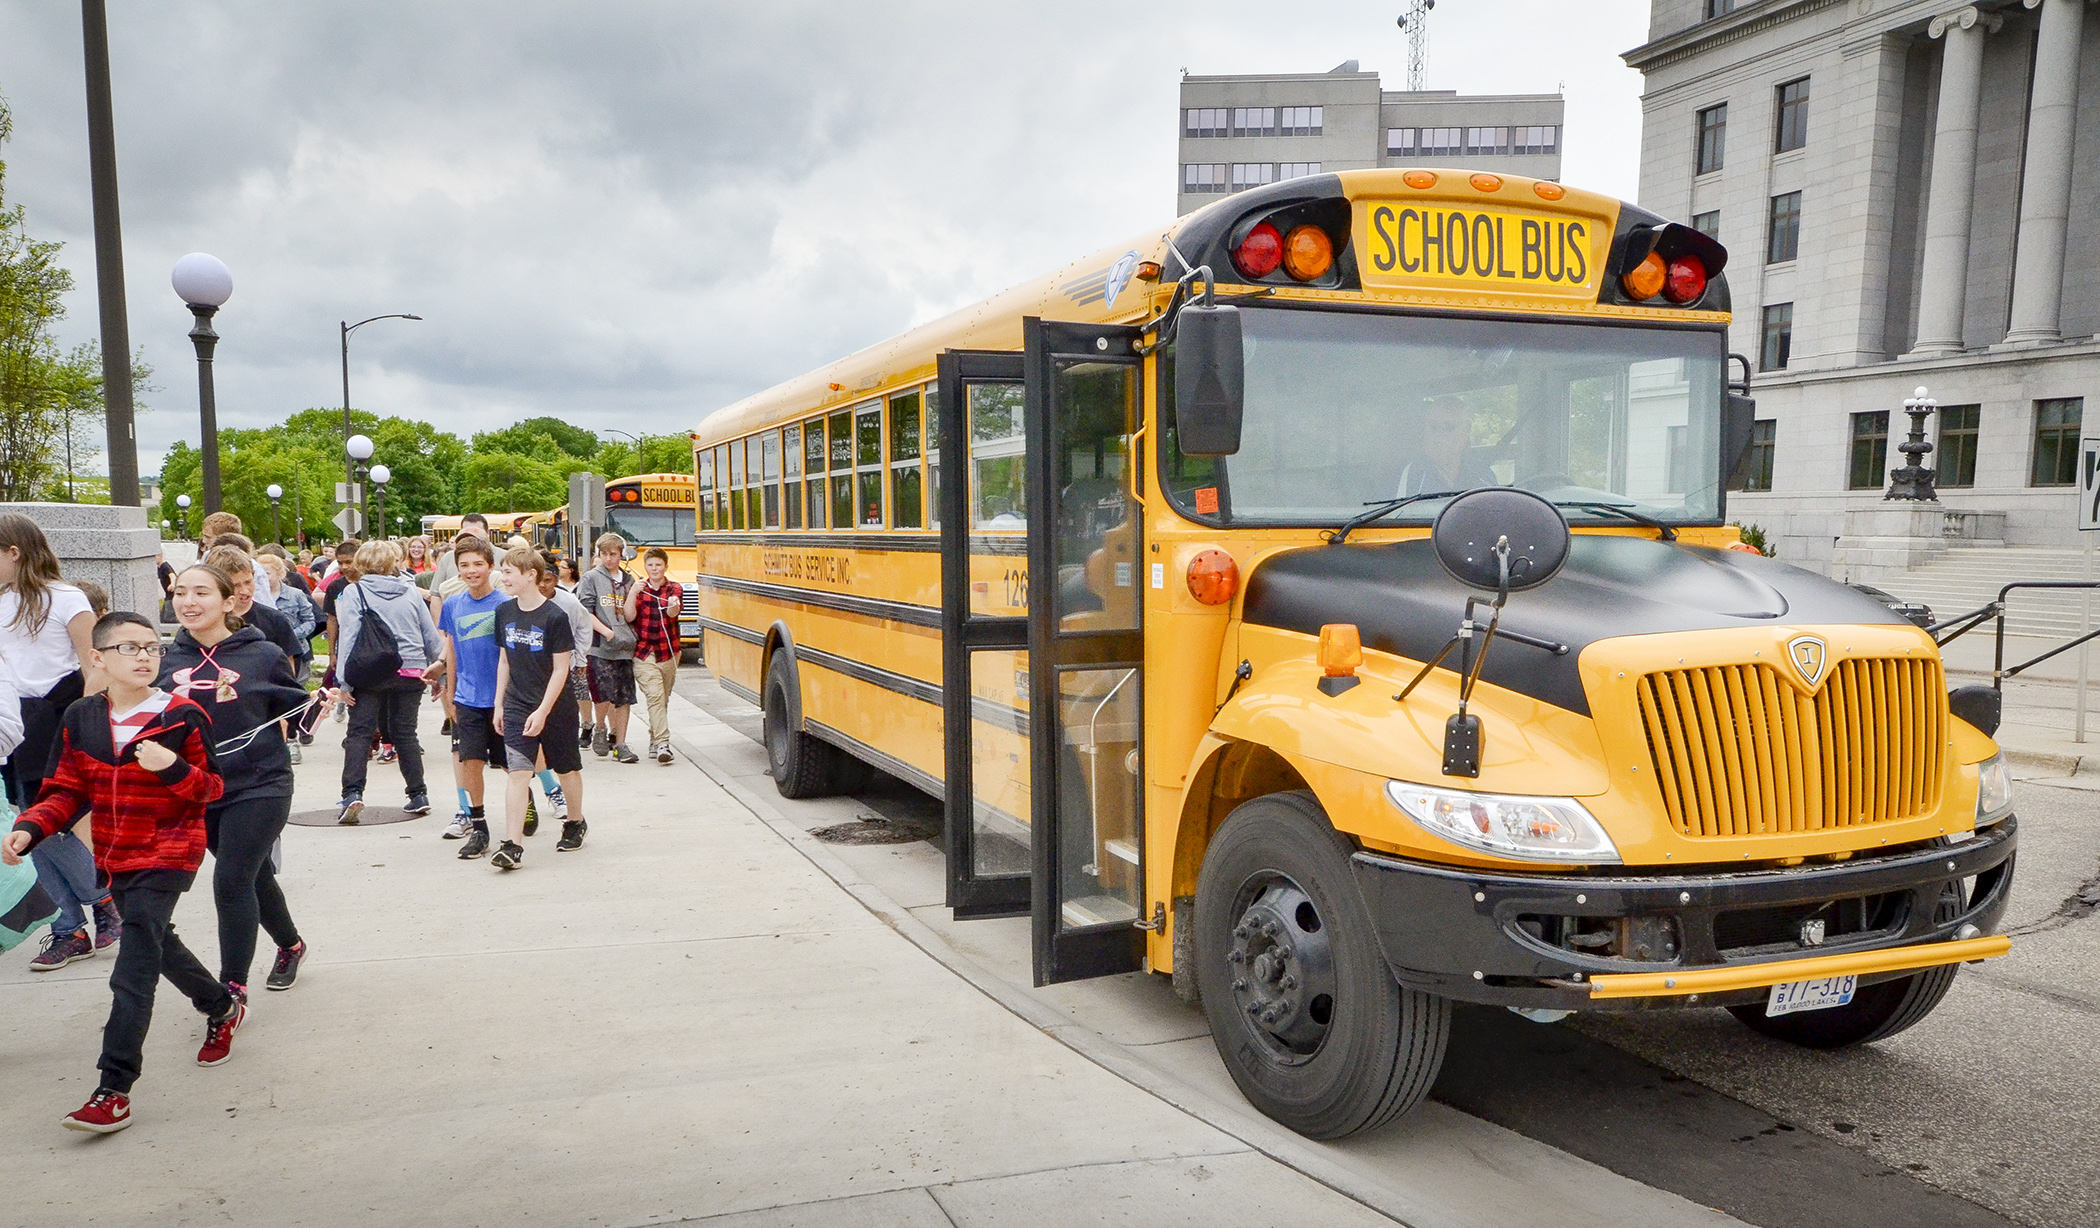 School bus drivers, cafeteria workers, and other hourly school workers who have little or no income while schools are on break are exempted from receiving unemployment insurance. A bill heard Monday could change that. House Photography file photo